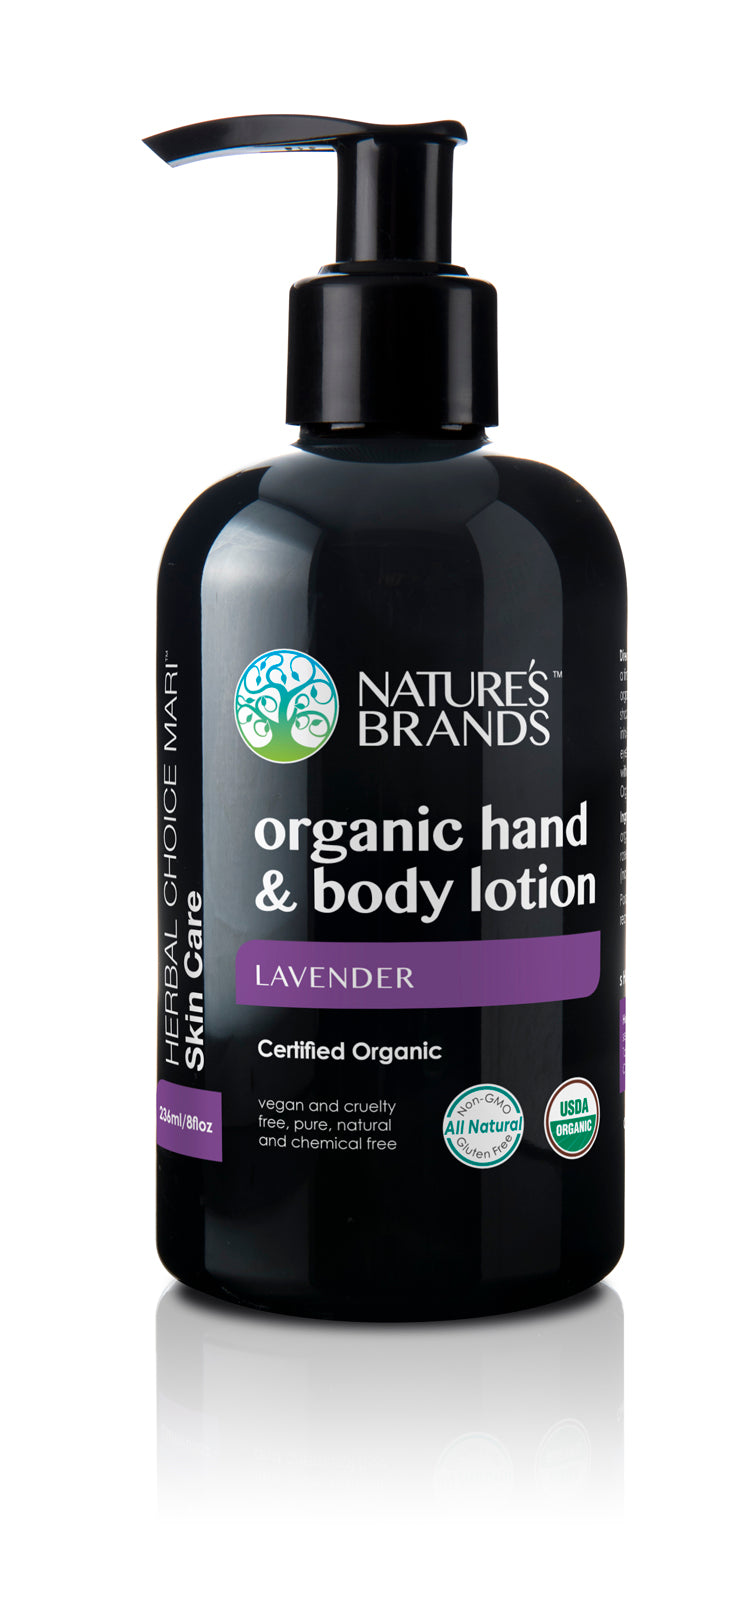 overschrijving Anoniem maag Herbal Choice Mari Organic Hand And Body Lotion, Lavender – Nature's Brands